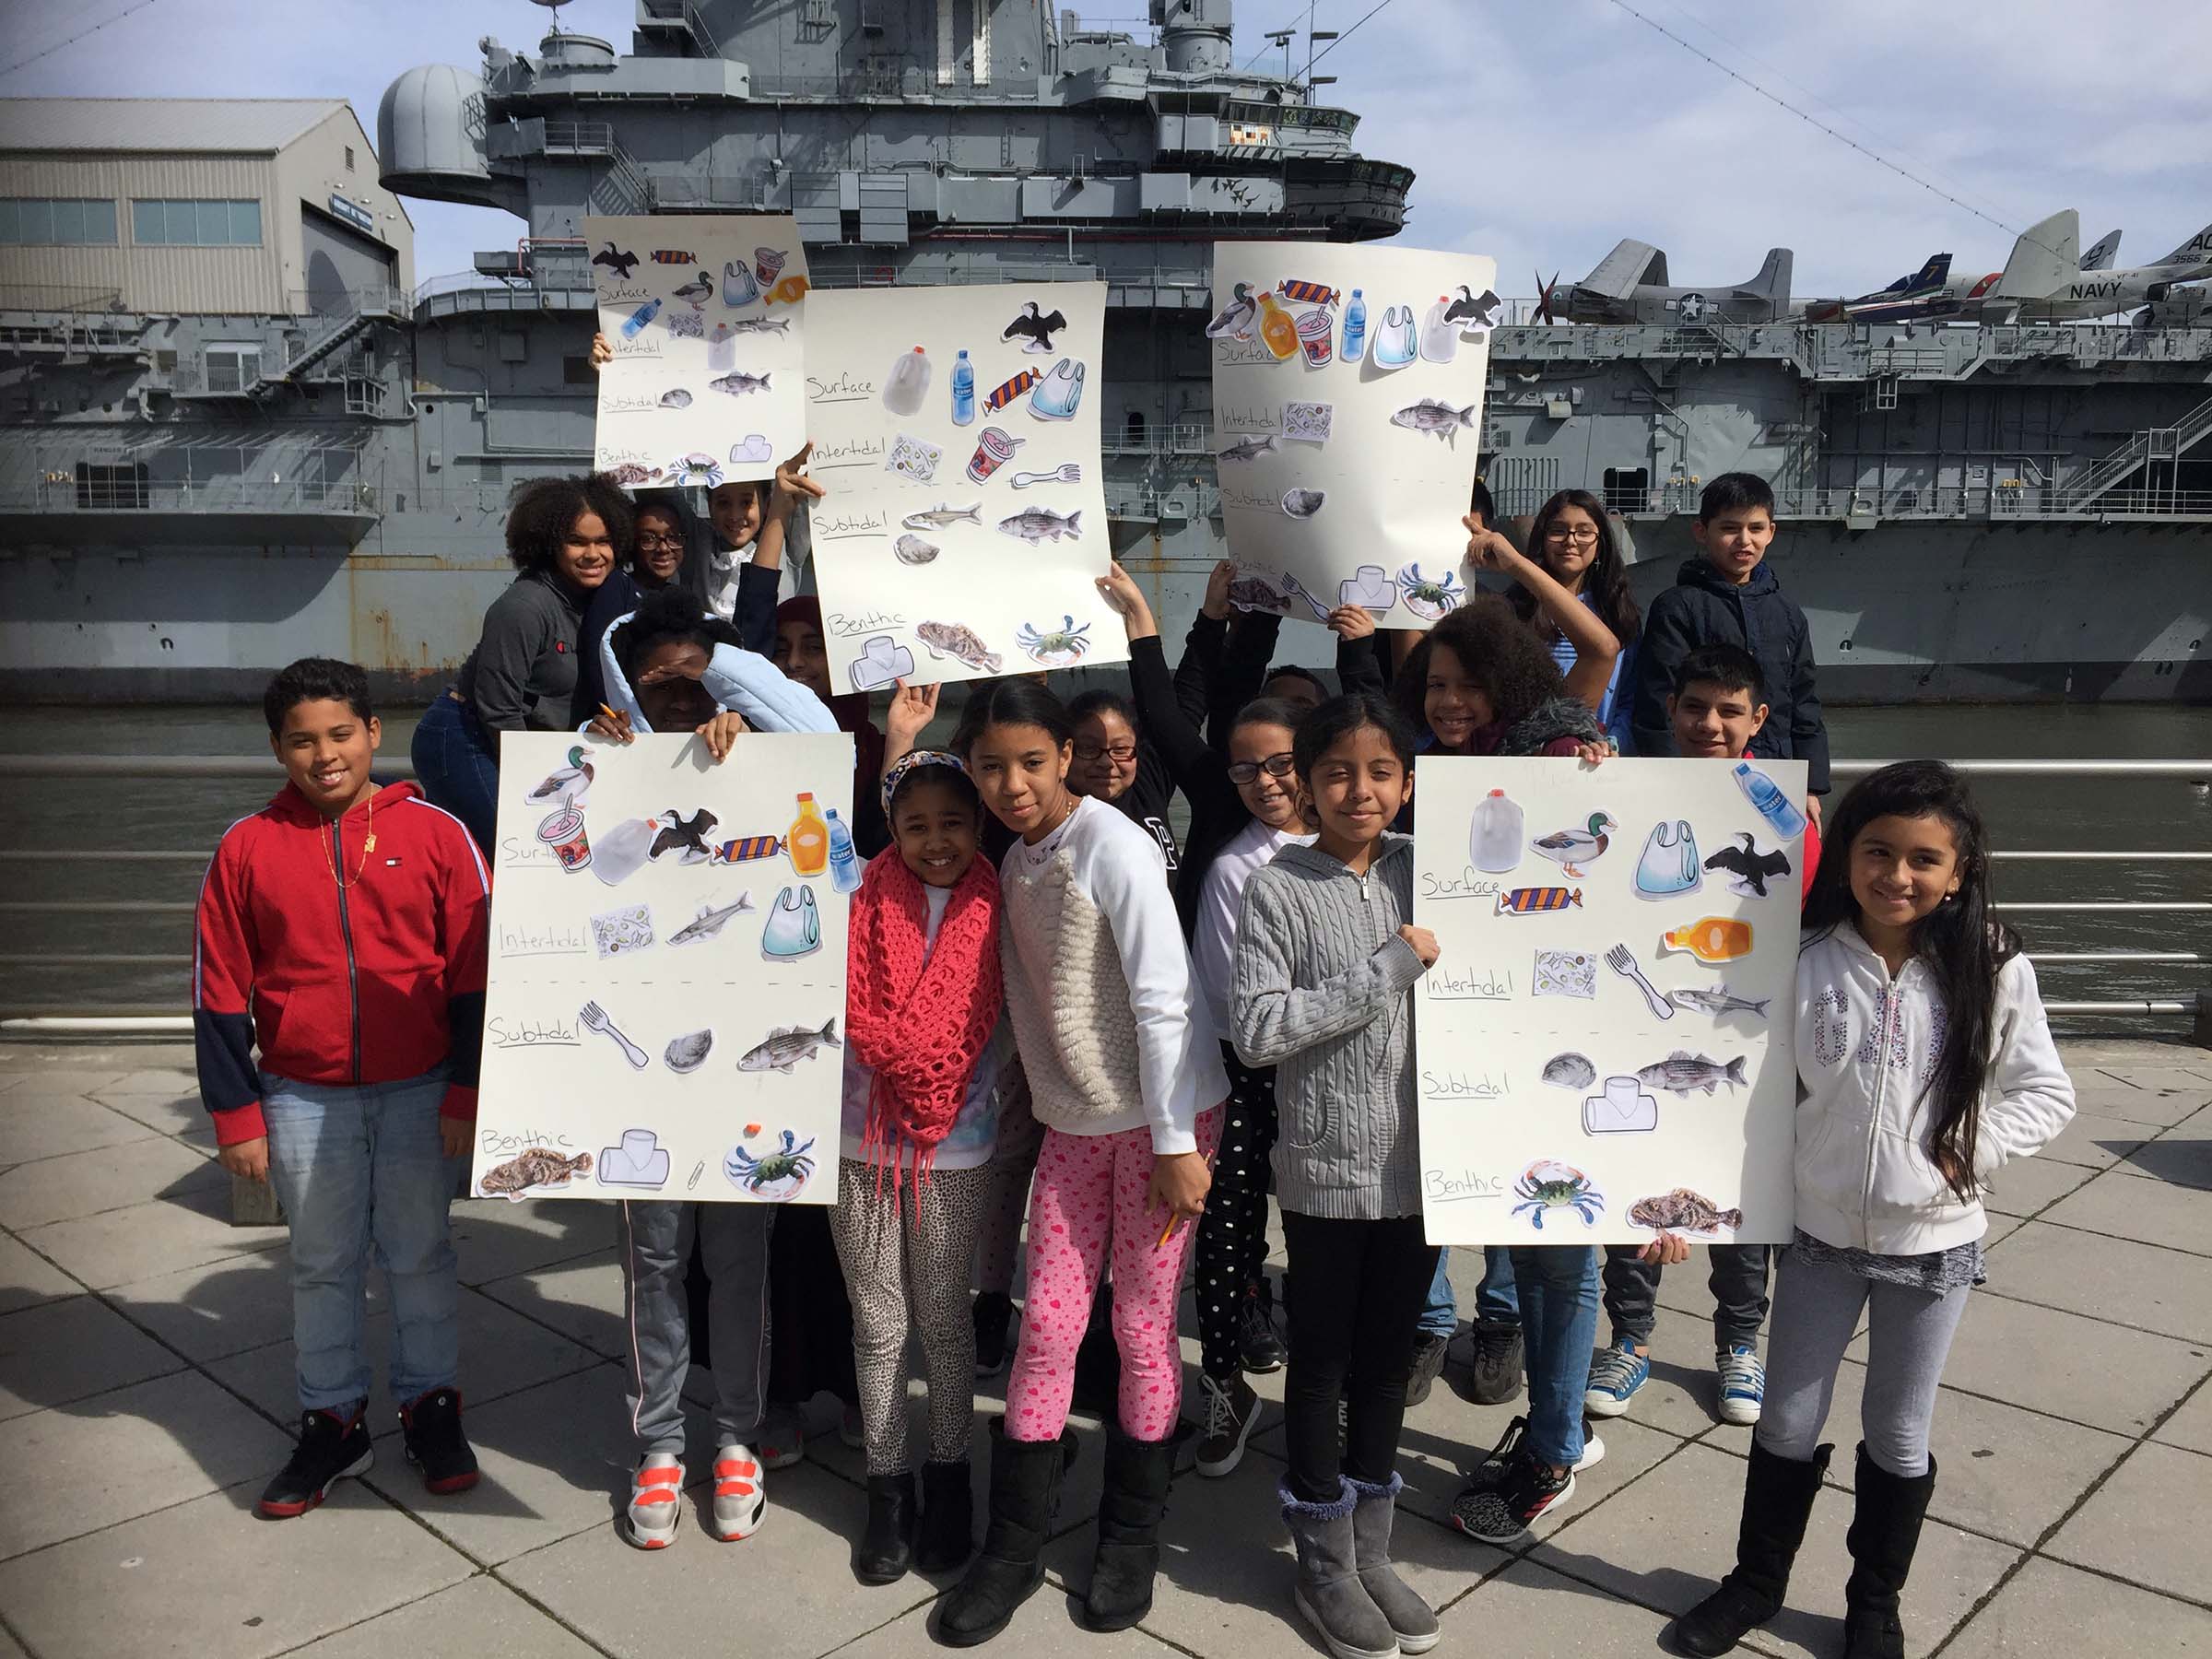 Kids pos with fish posters in front of the Intrepid vessel